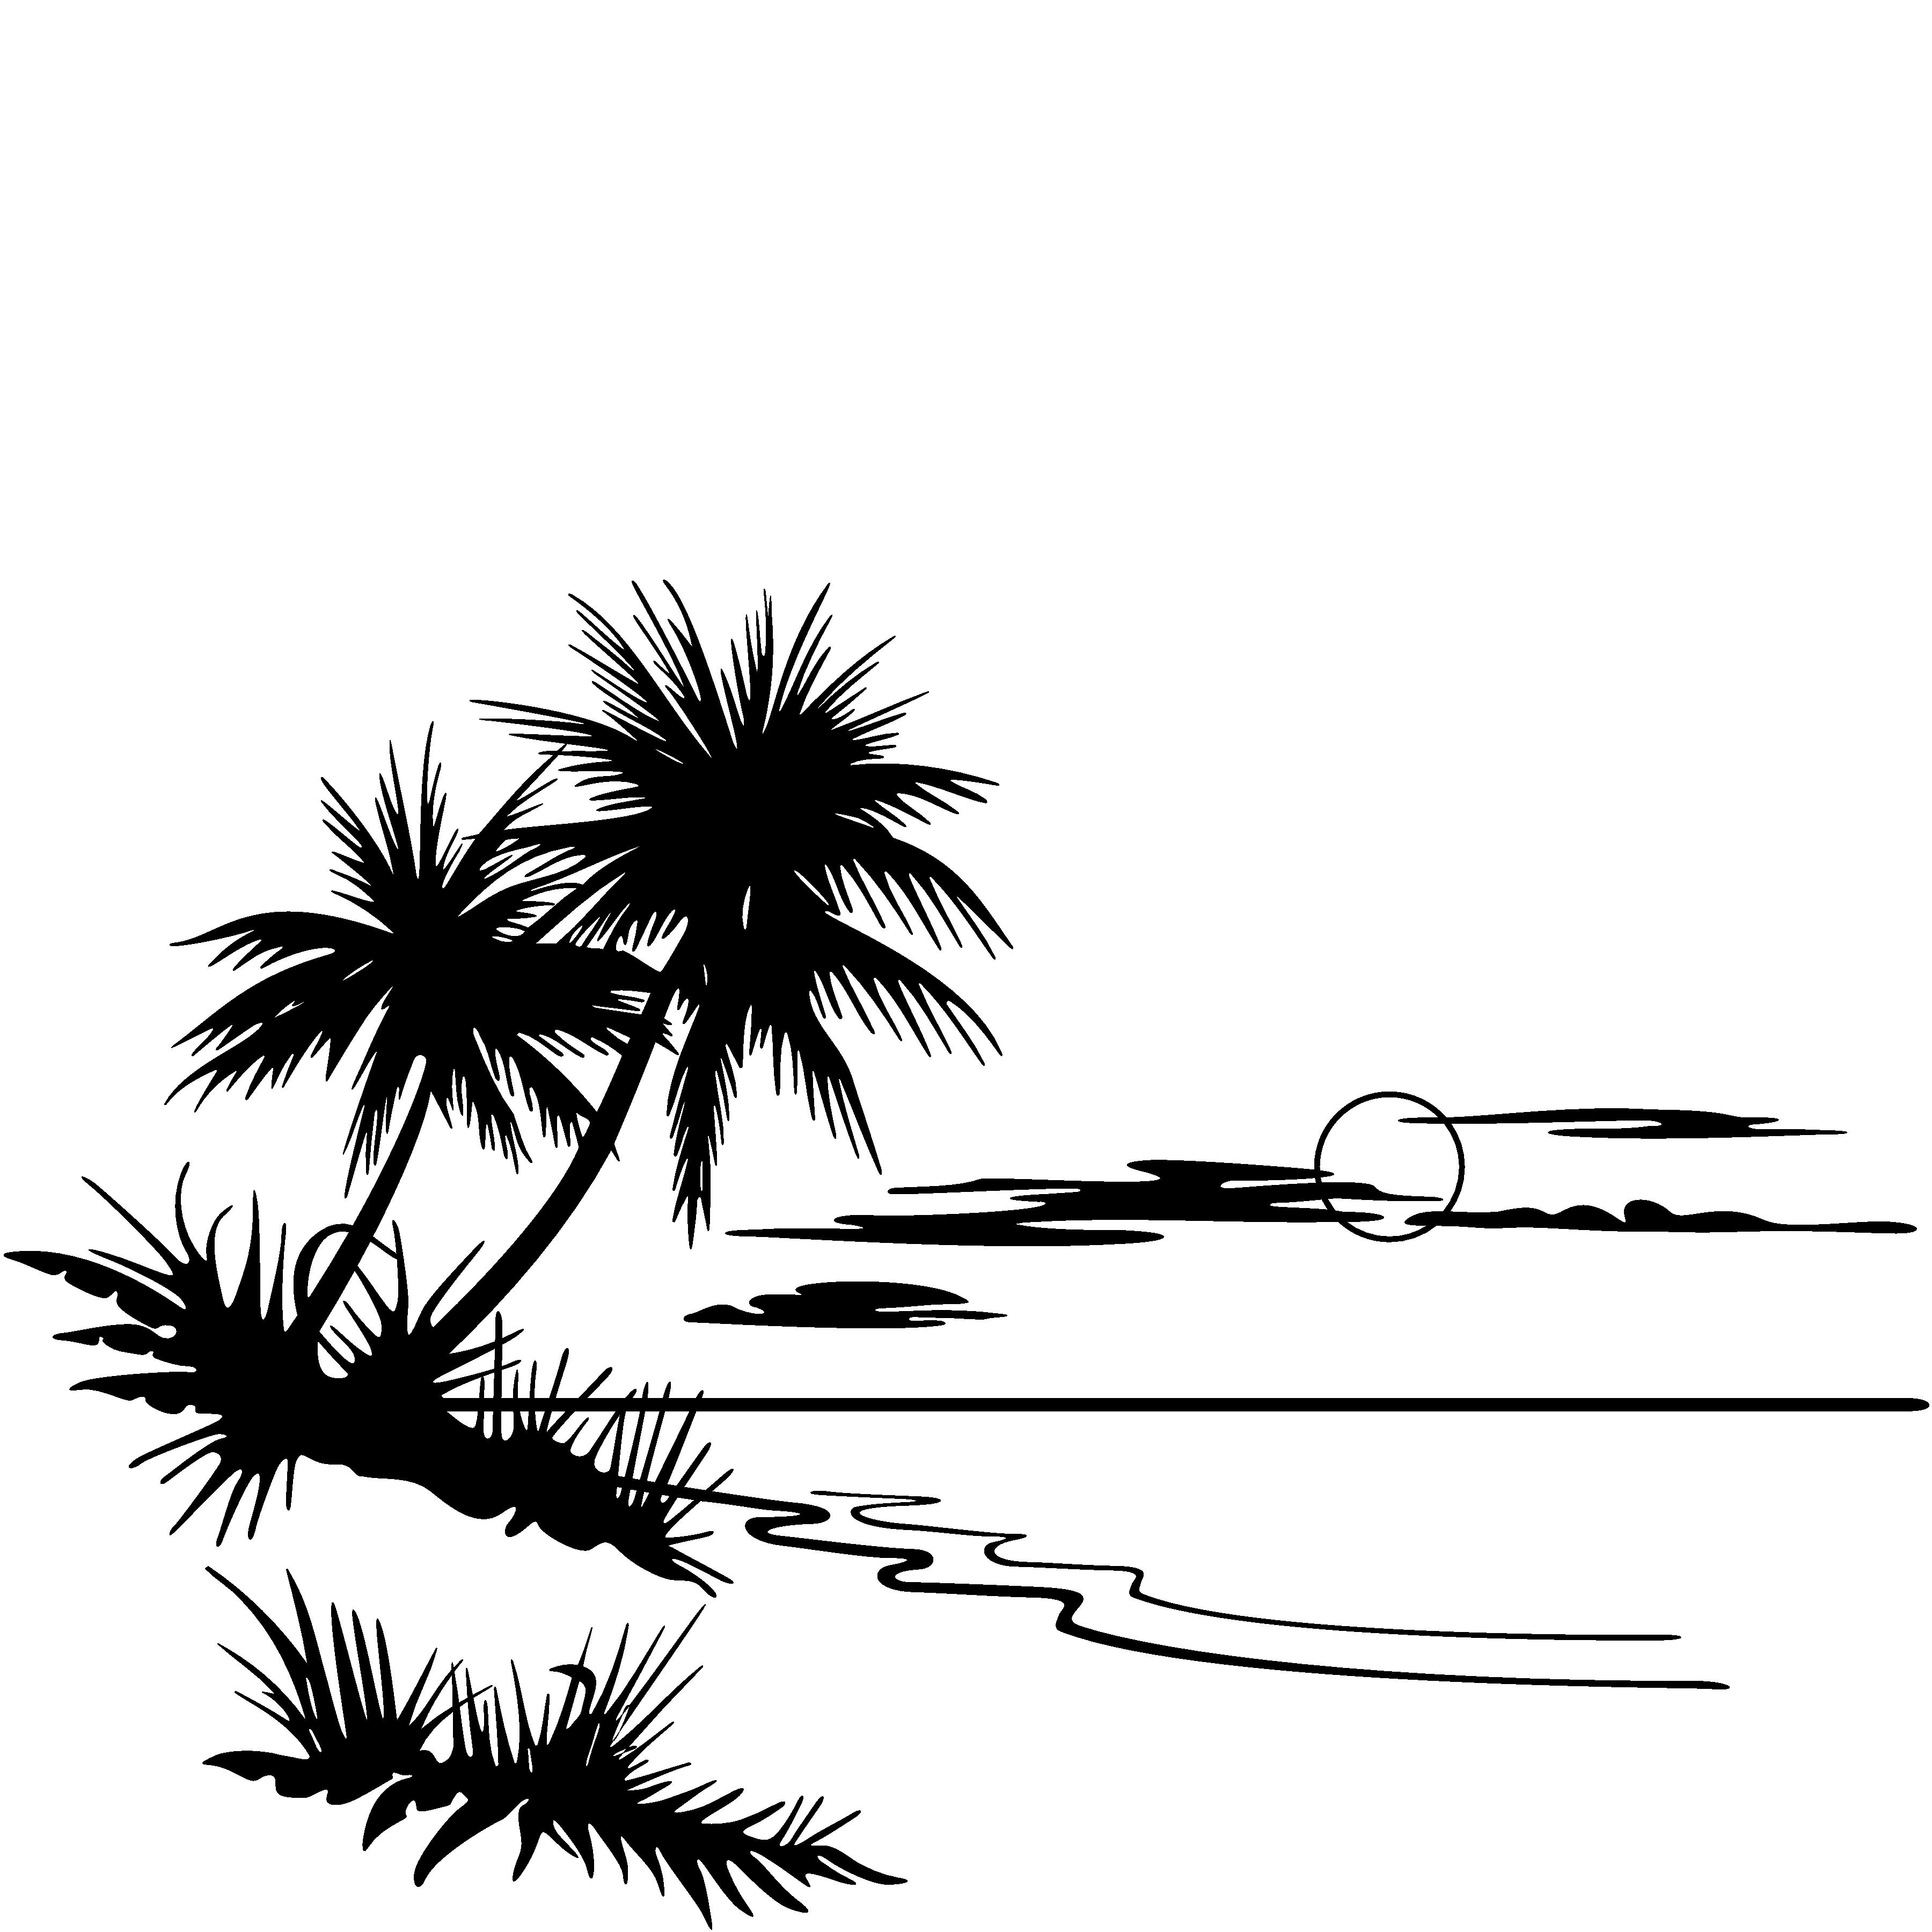 Ocean Clipart Black And White | Clipart Panda - Free Clipart Images